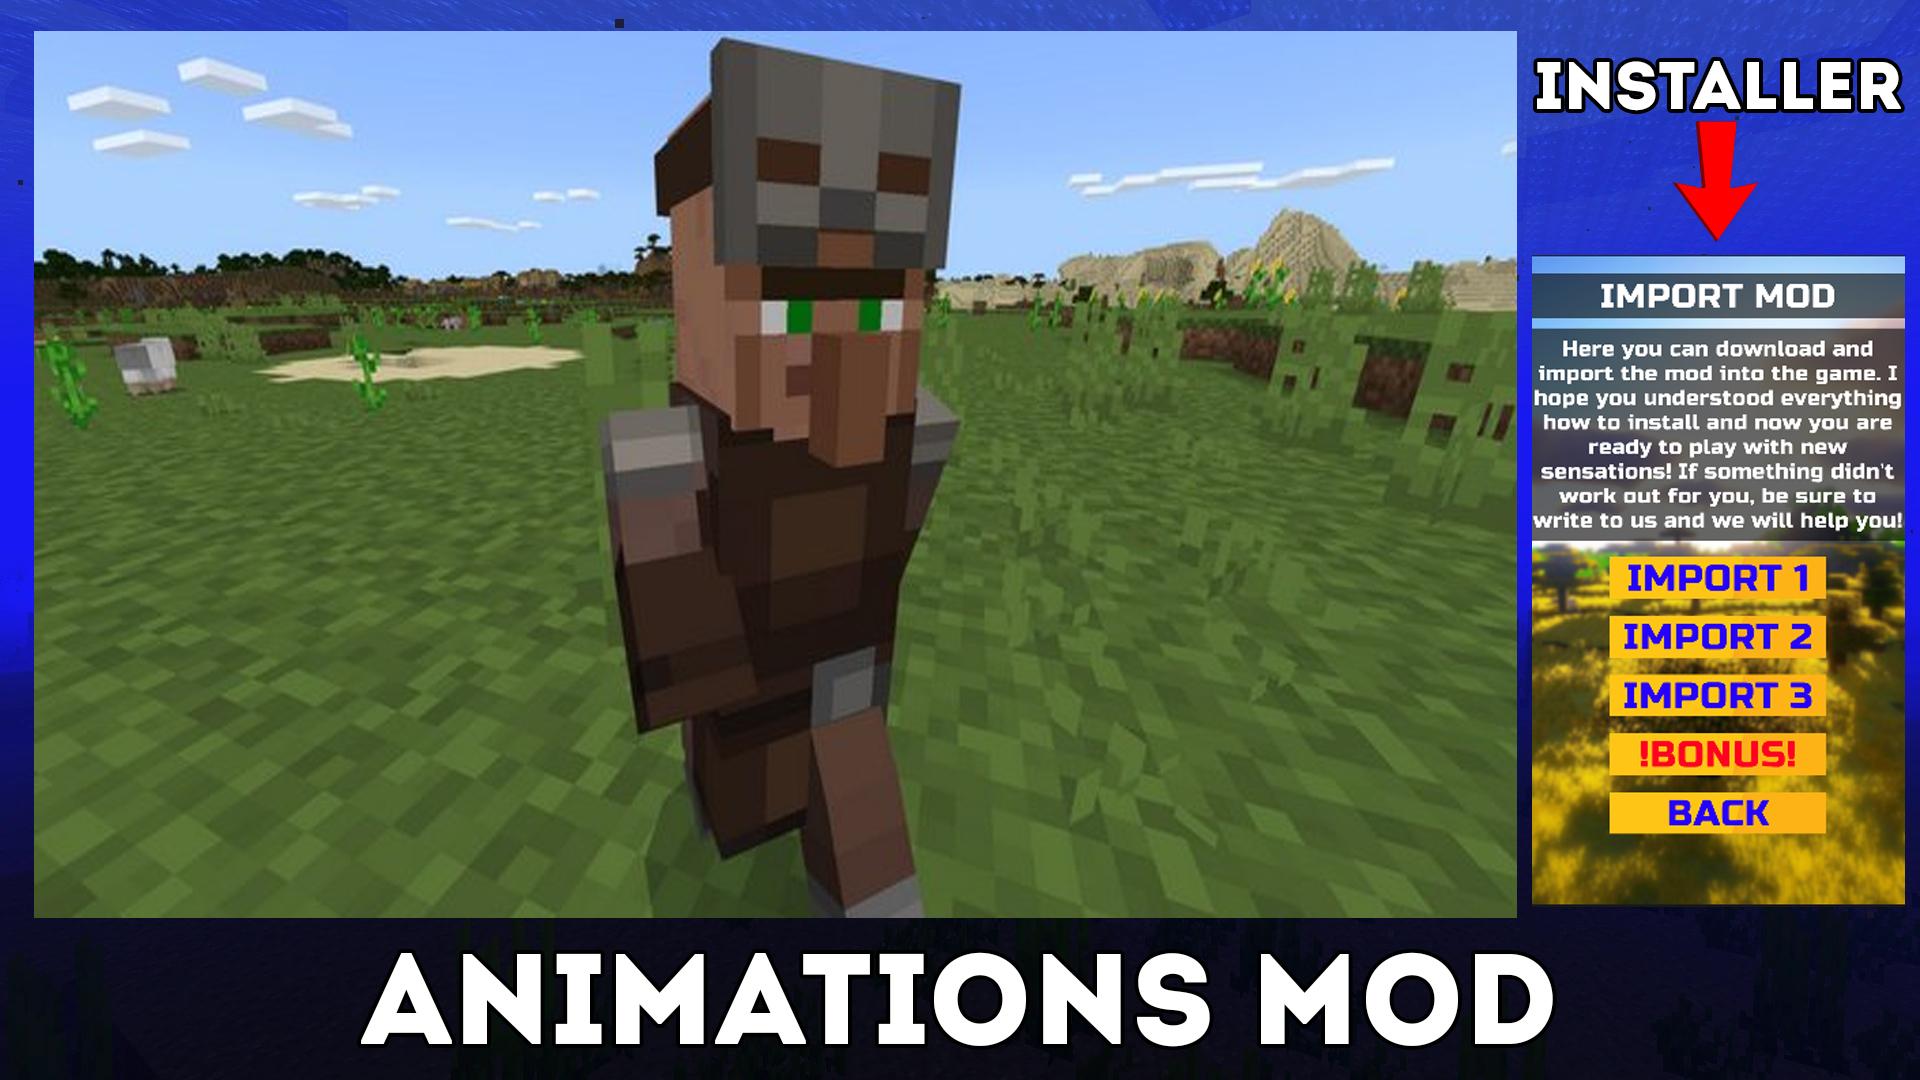 Chunk animator mod 1.16. Minecraft animation Mod. Improved Mobs. Rubber animations Mod for Minecraft.